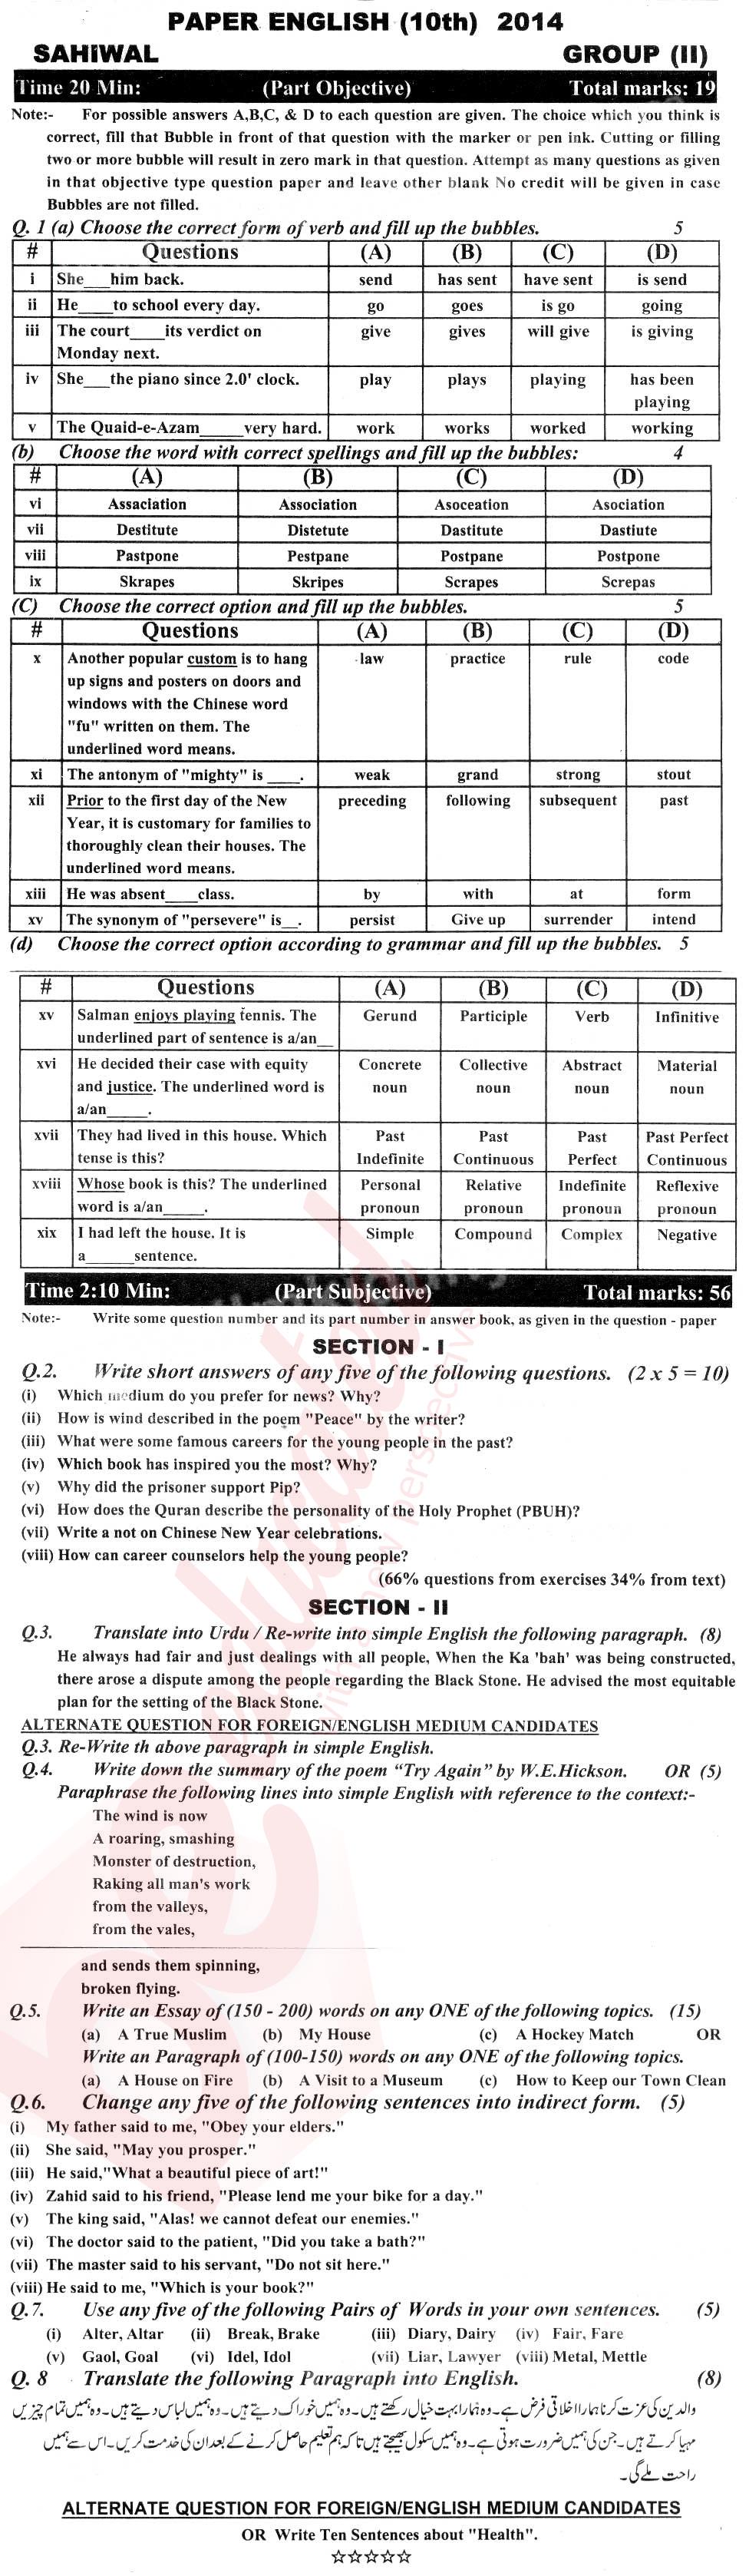 English 10th class Past Paper Group 2 BISE Sahiwal 2014